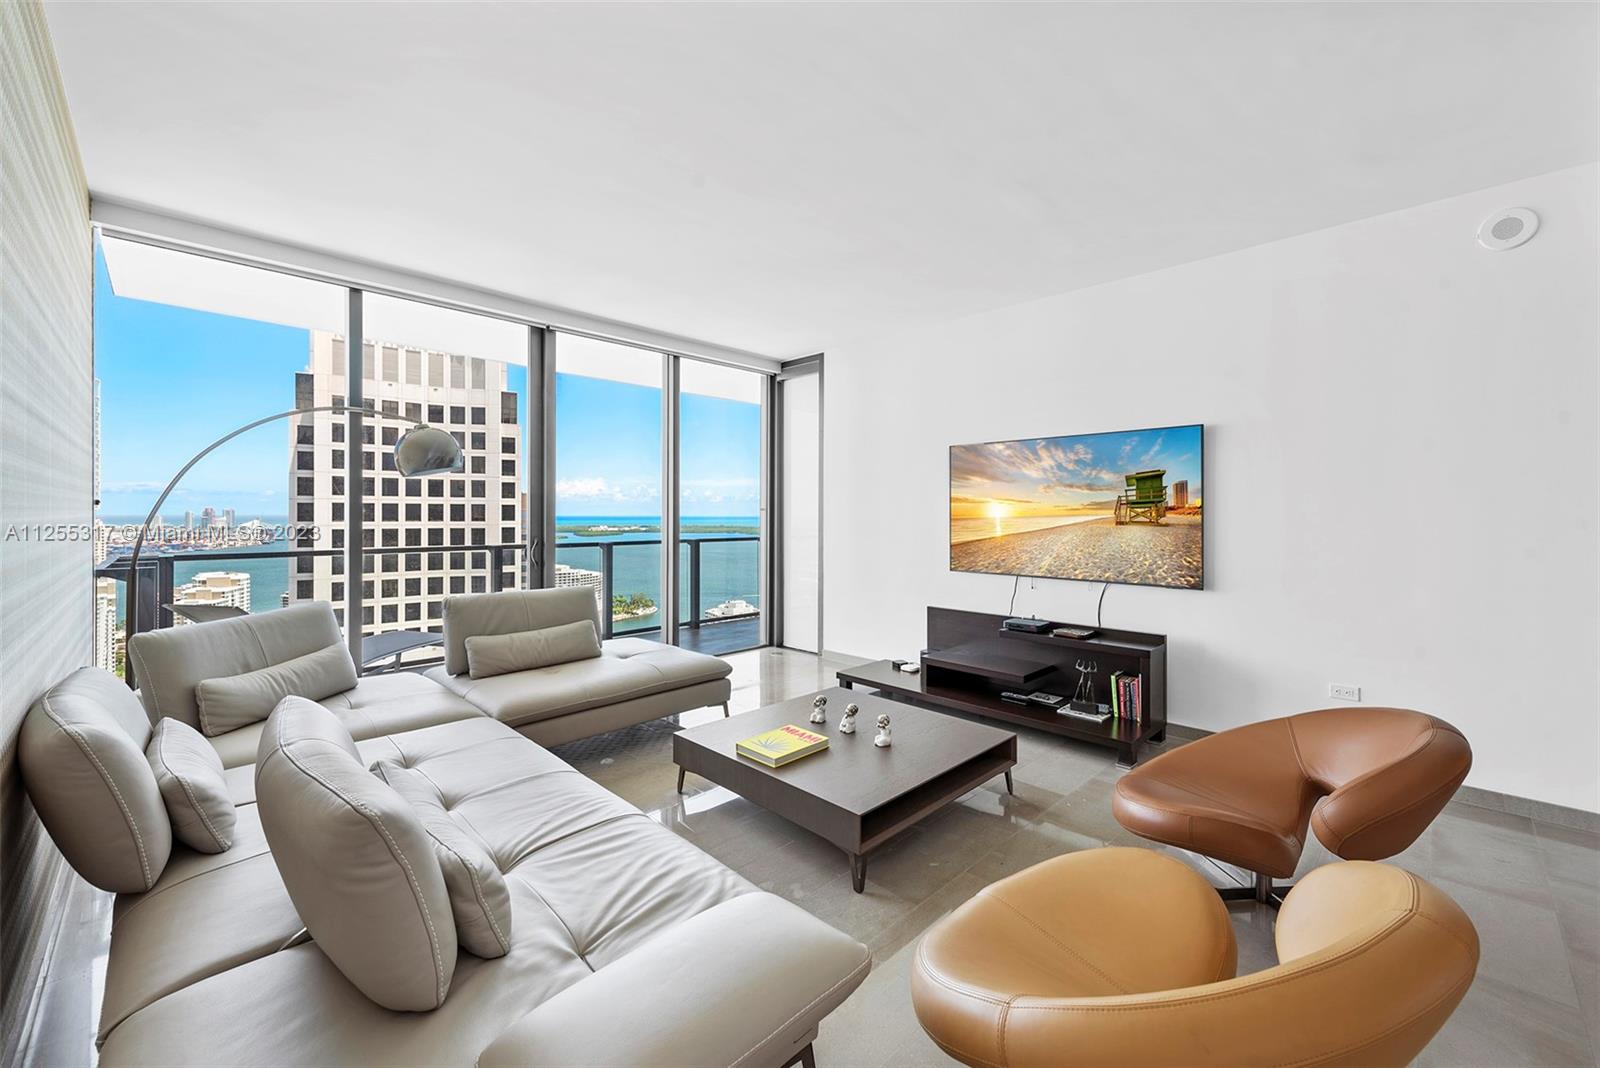 Experience Brickell living at its best with spectacular Bay and City views from this 3 bed + Den, 3.5 baths split floor plan in the most desired 03 line at Brickell City Center's Reach Condo Tower.  You will enjoy private access to the BCC shopping, dining and entertaining gallery.  This bright and spacious unit features over 50 linear feet of balcony accessible from every bedroom and the living area, floor to ceiling windows and doors, marble floors, Italkraft cabinets, quartz countertops and premium Bosch appliances.  Half-acre amenity deck includes tropical gardens, BBQ grills, indoor and outdoor gym, heated lap and social pool, pool side cafe, Spa with Sauna, steam room and dipping pool, children's playroom, Business center, library and more.  Full time concierge on Level 6.